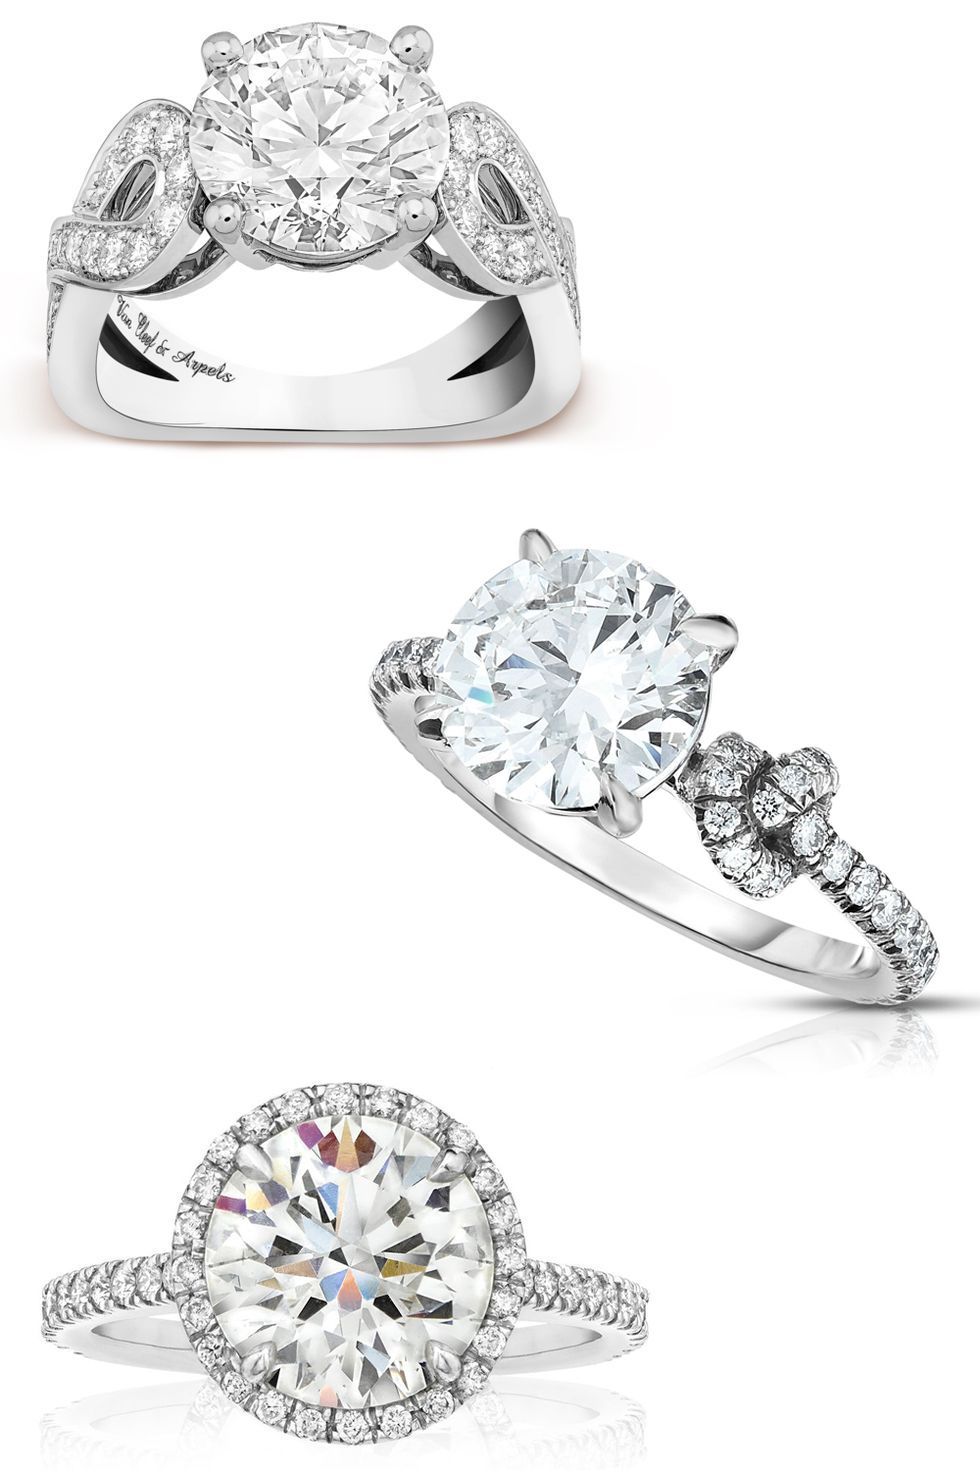 Engagement Ring Cuts Every Woman Should Know Best Diamond